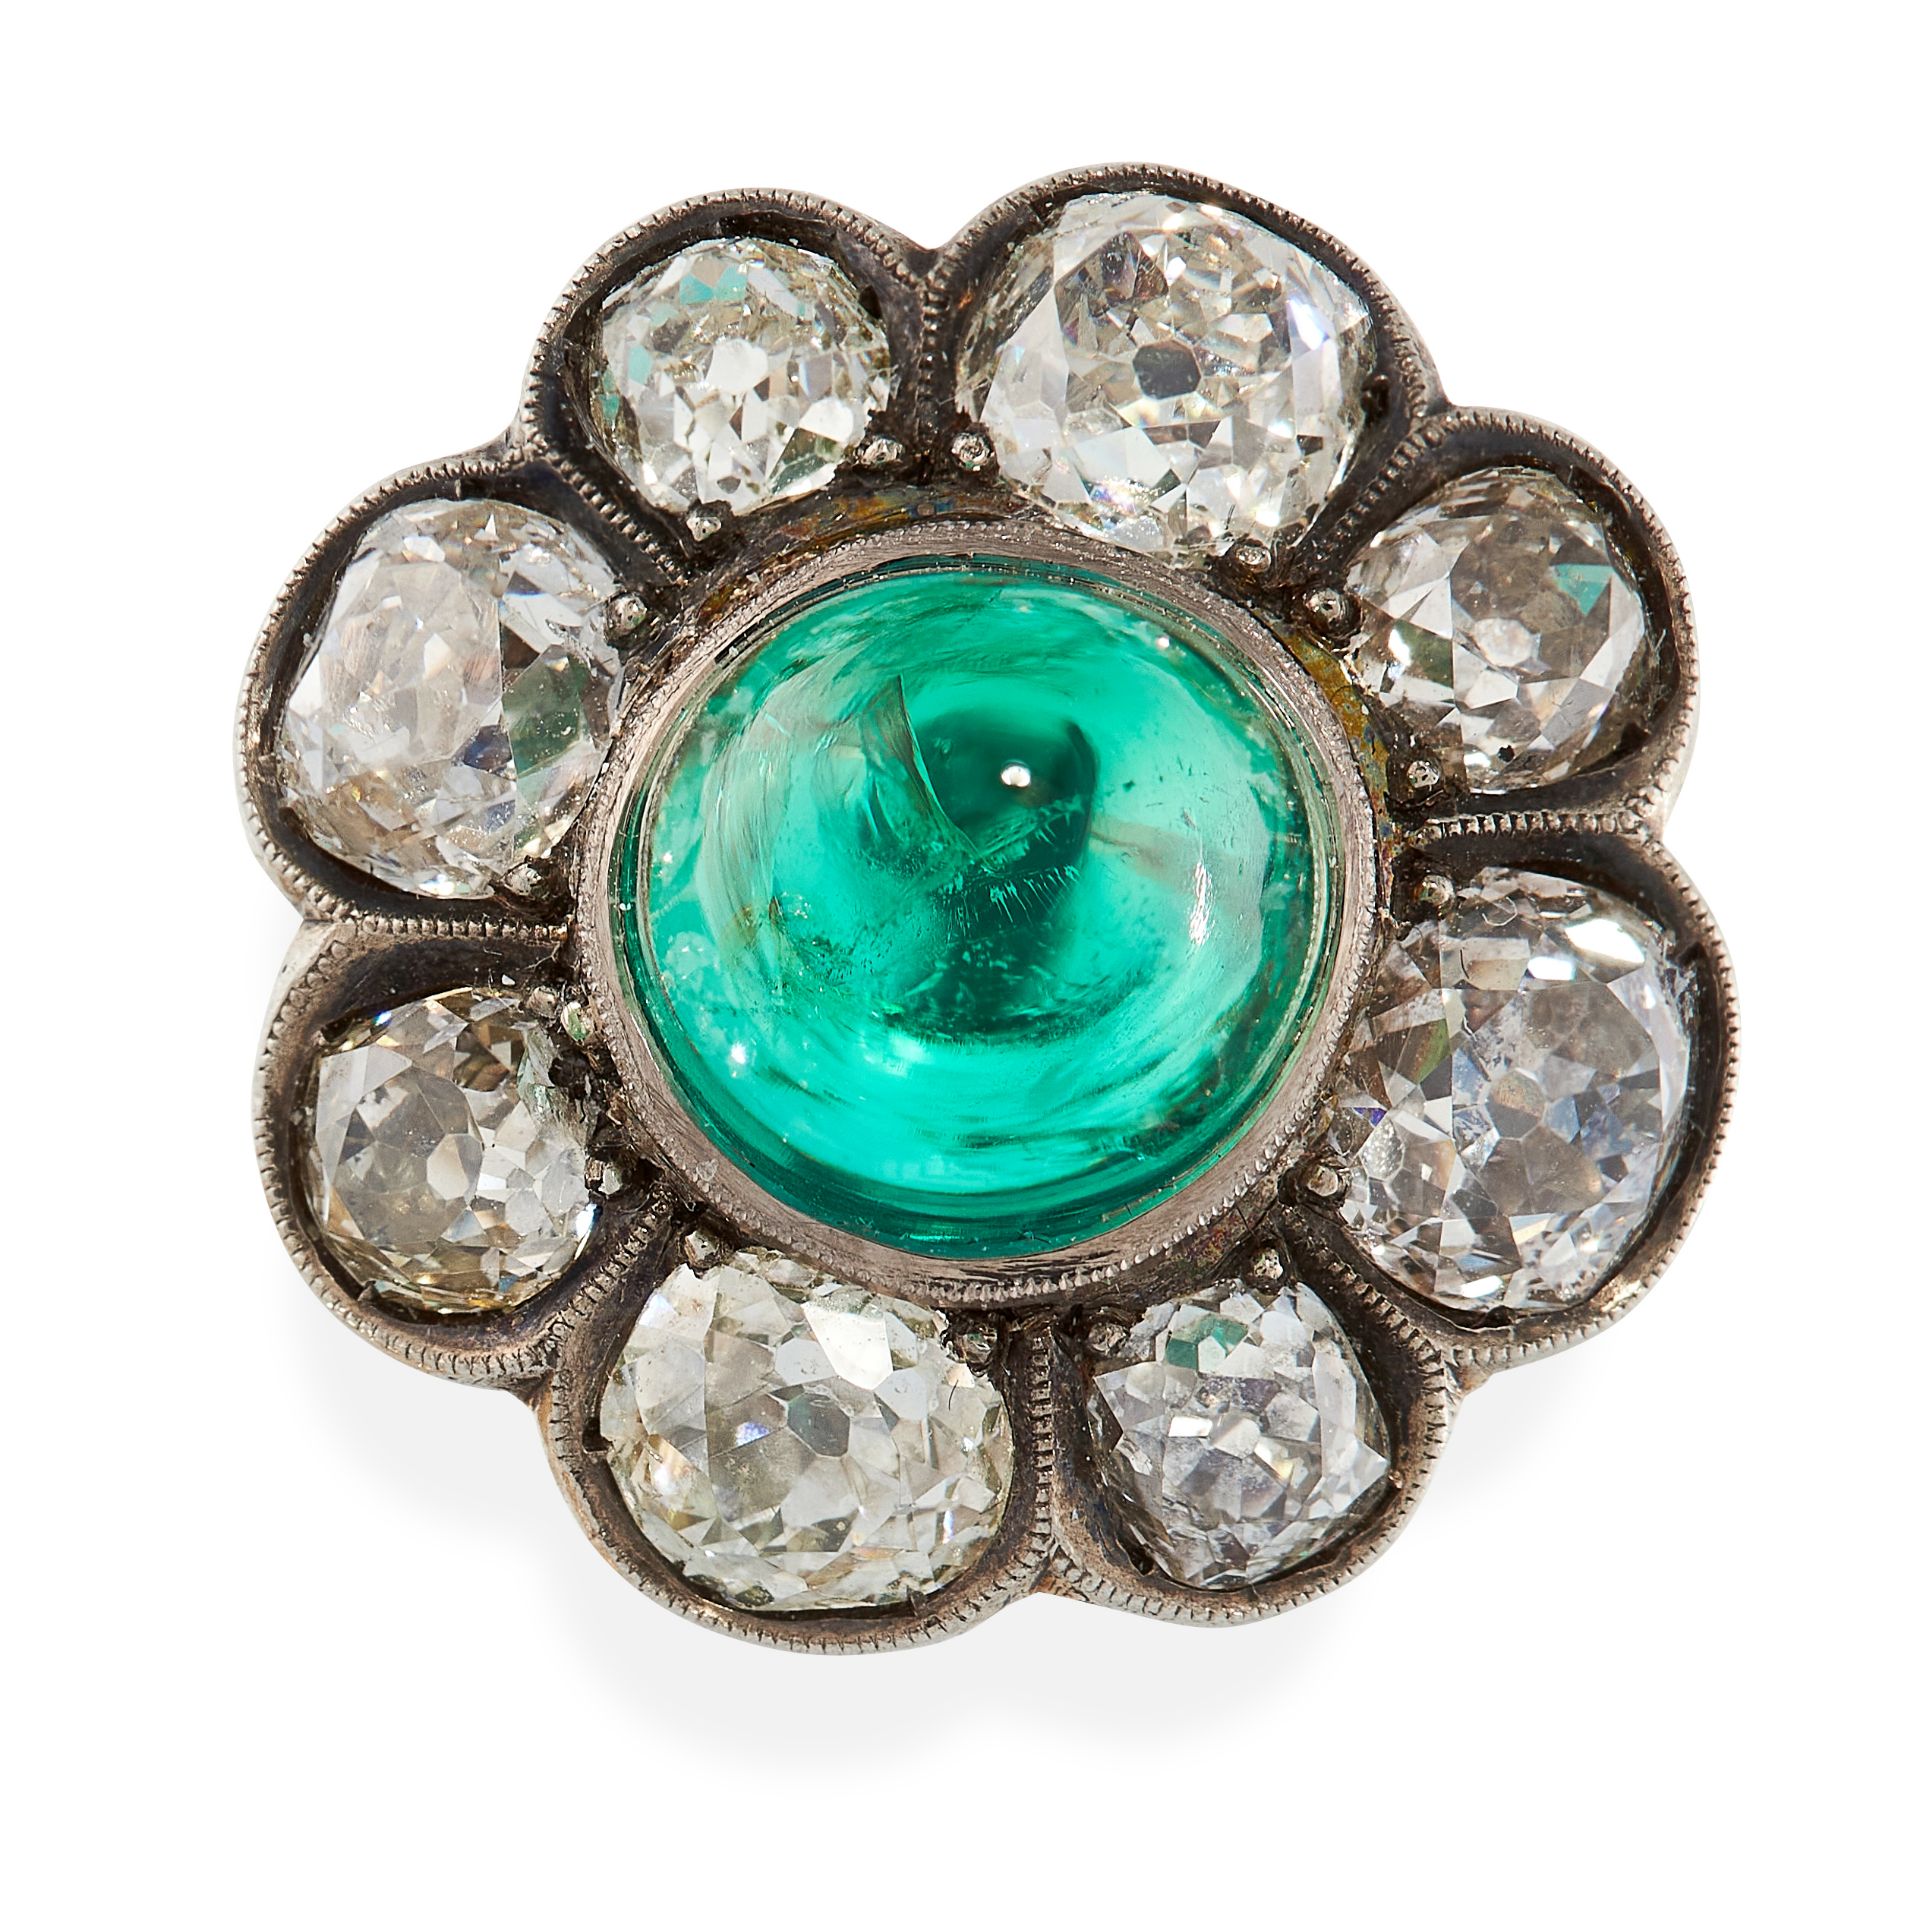 AN ANTIQUE EMERALD AND DIAMOND RING in yellow gold, set with a sugarloaf cabochon emerald of 7.10